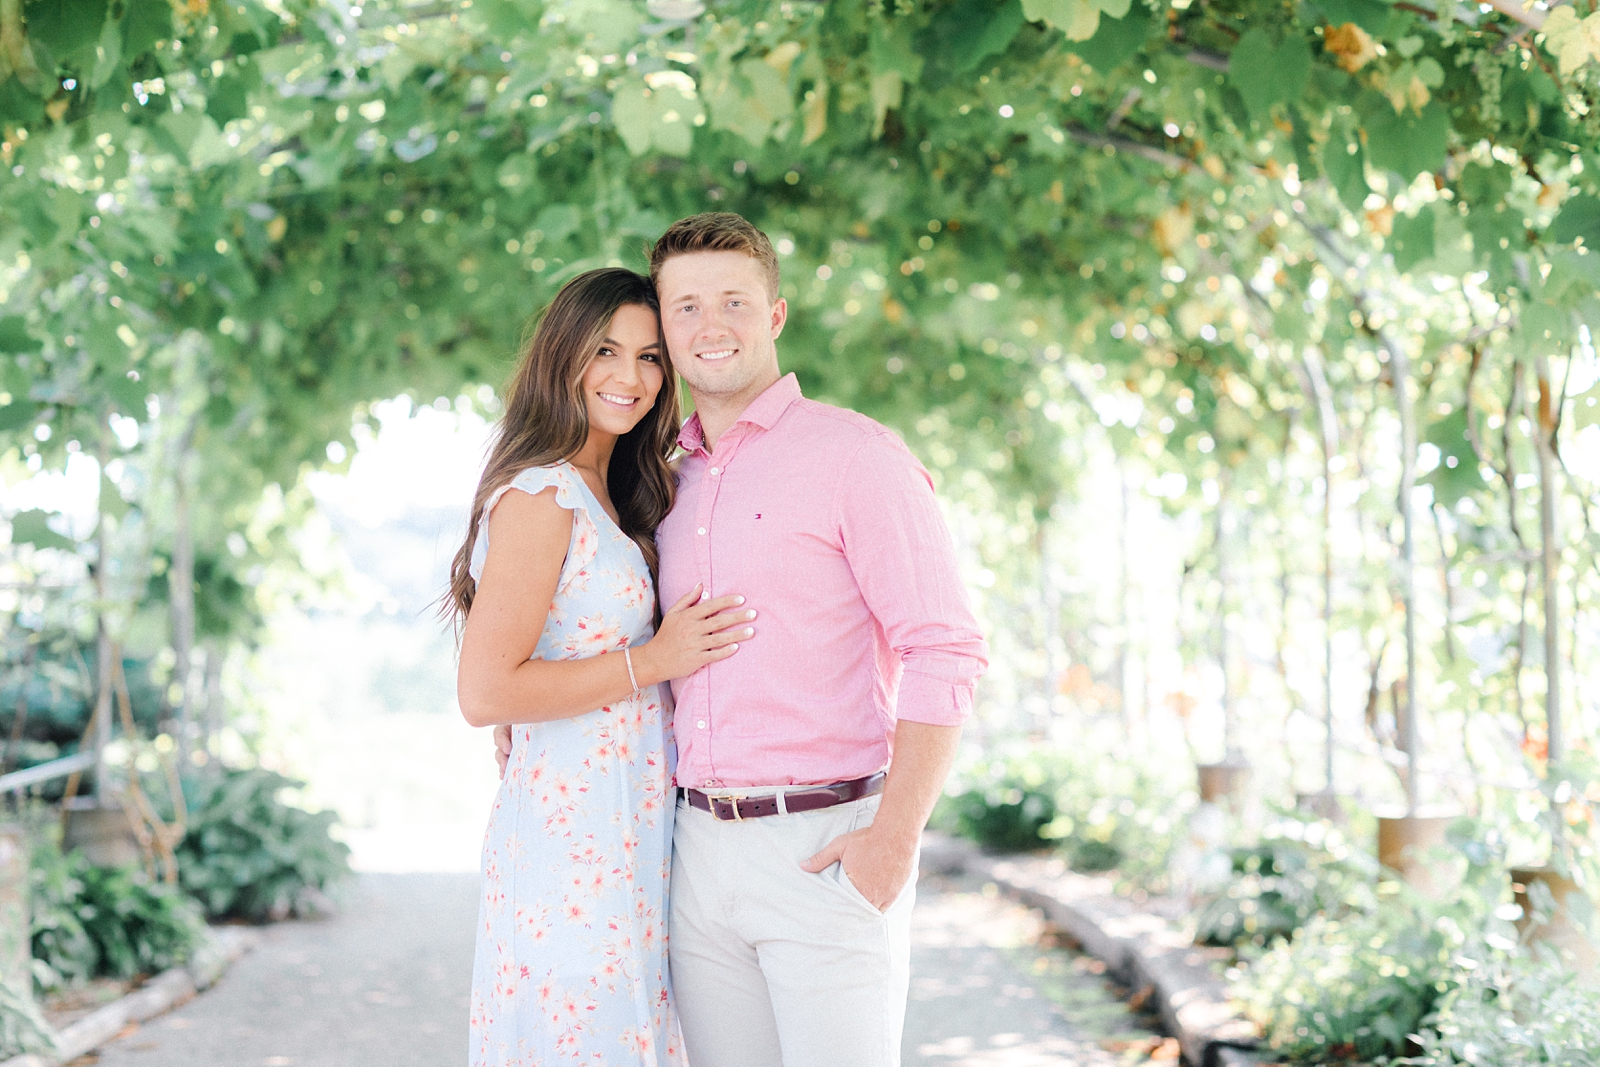 Engagement Session at Vinoklat Winery